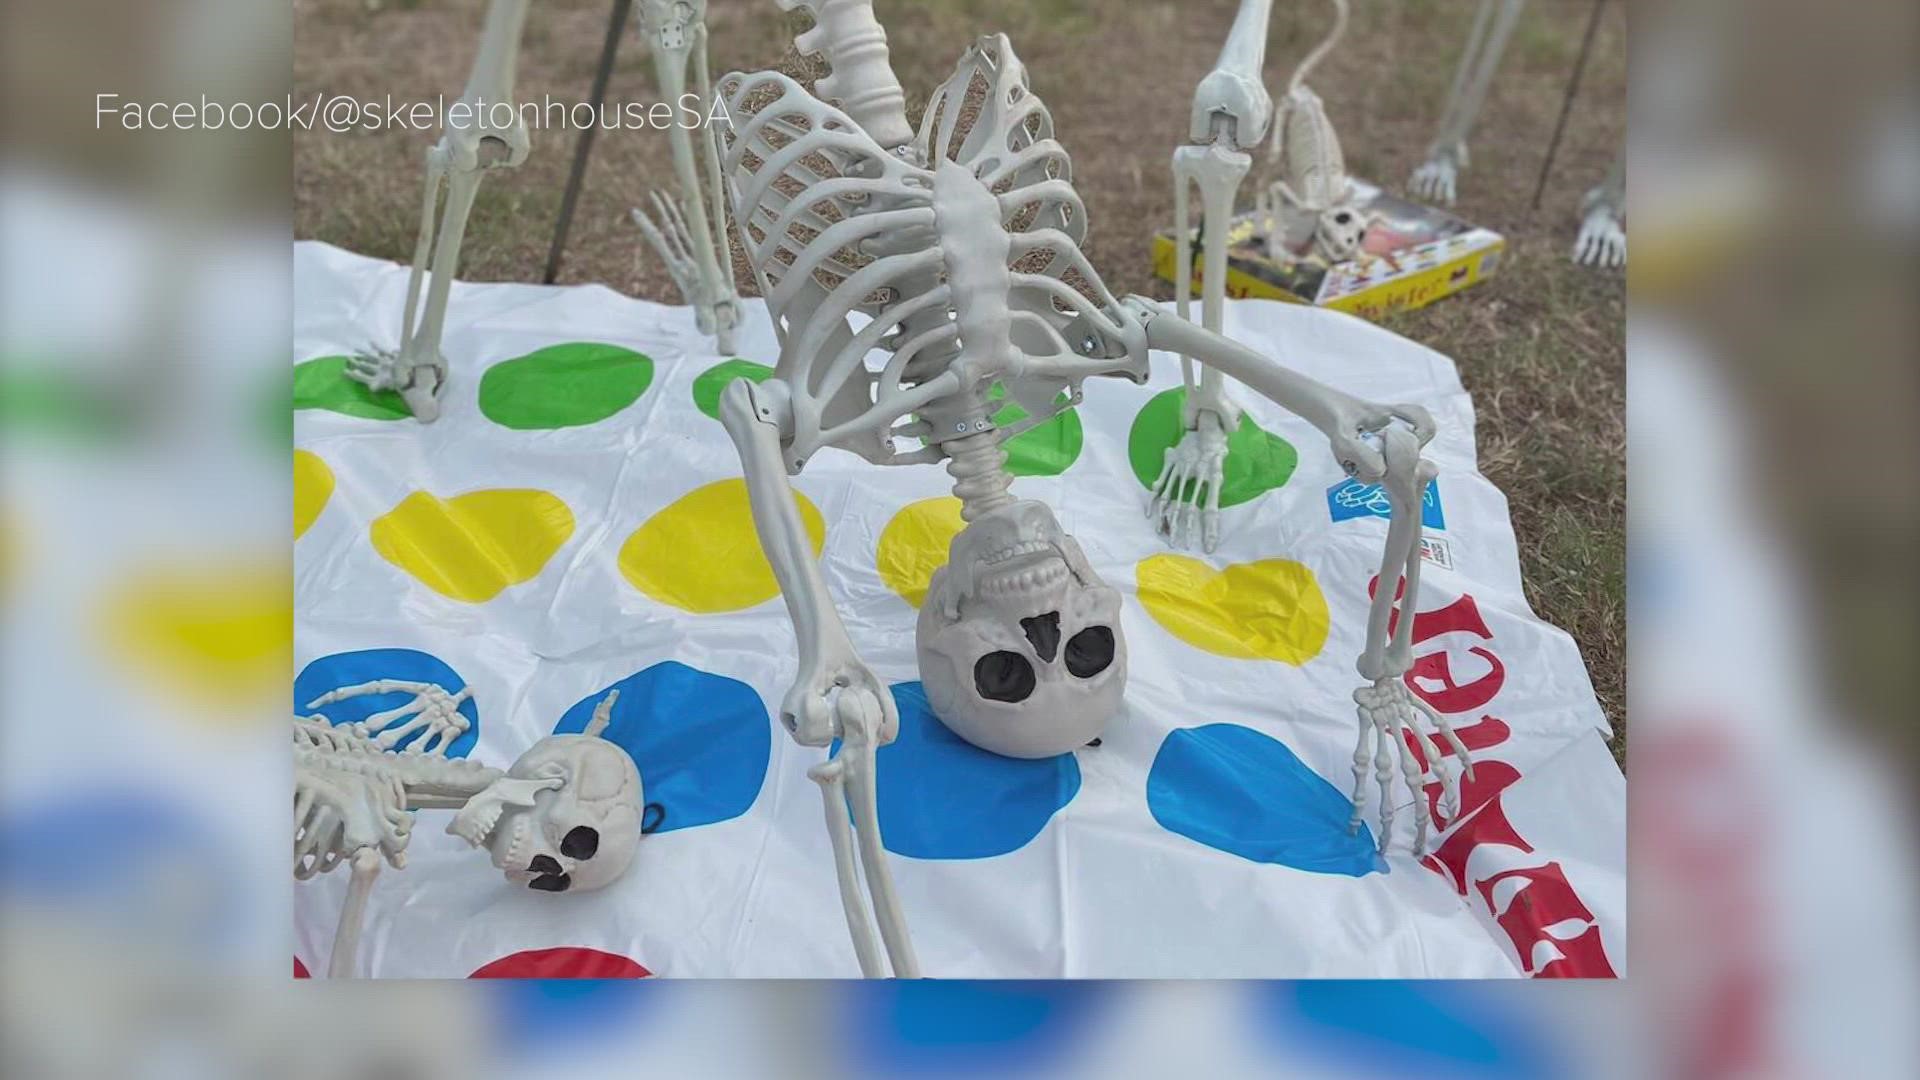 The family switches the display of bones out throughout the month of October.